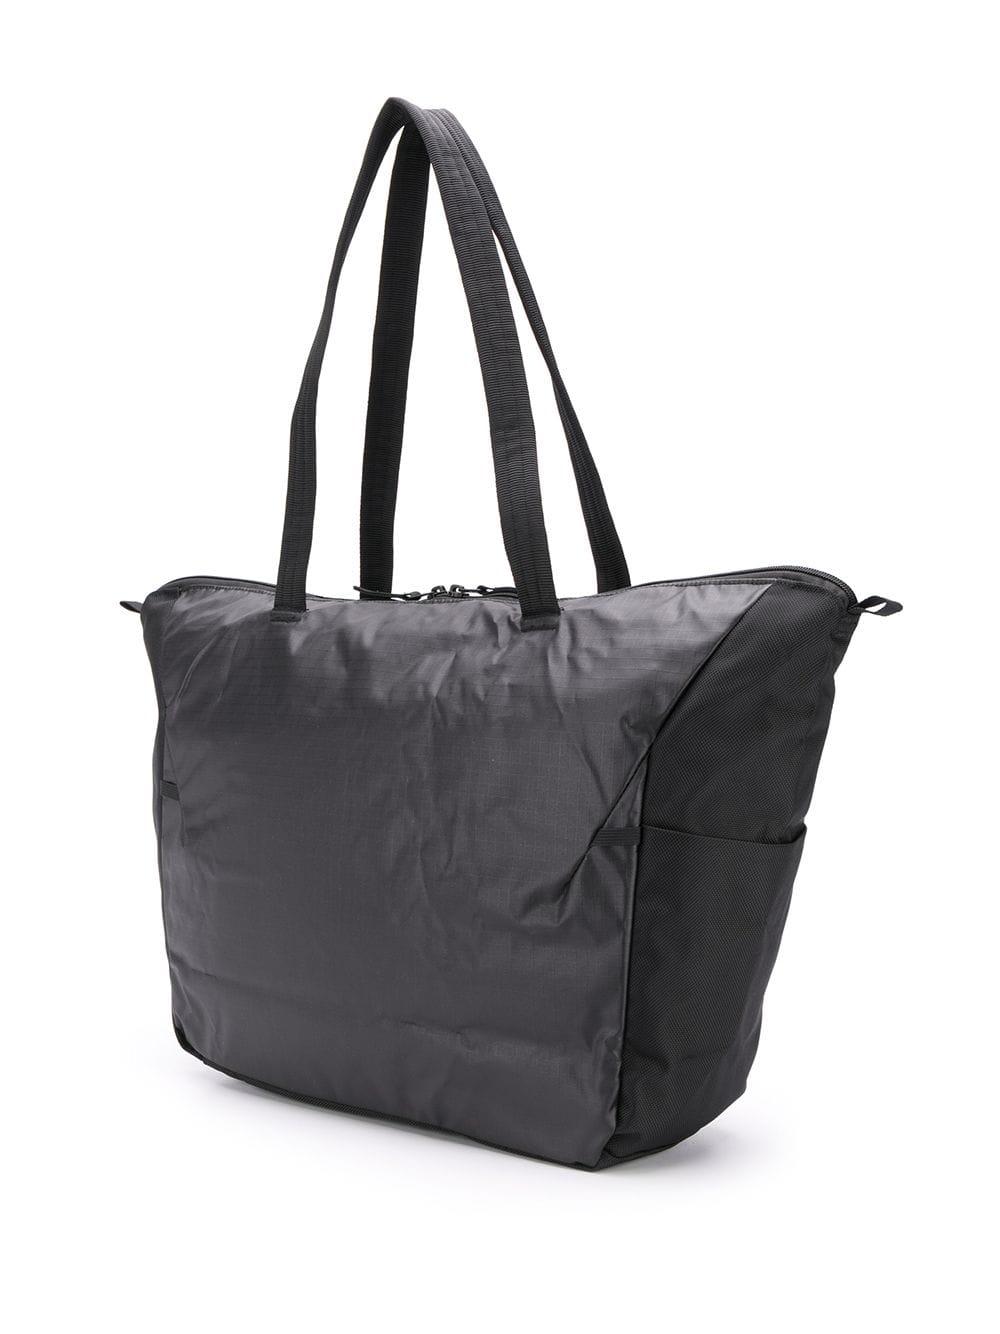 The North Face Stratoliner Tote Bag in Black for Men - Lyst